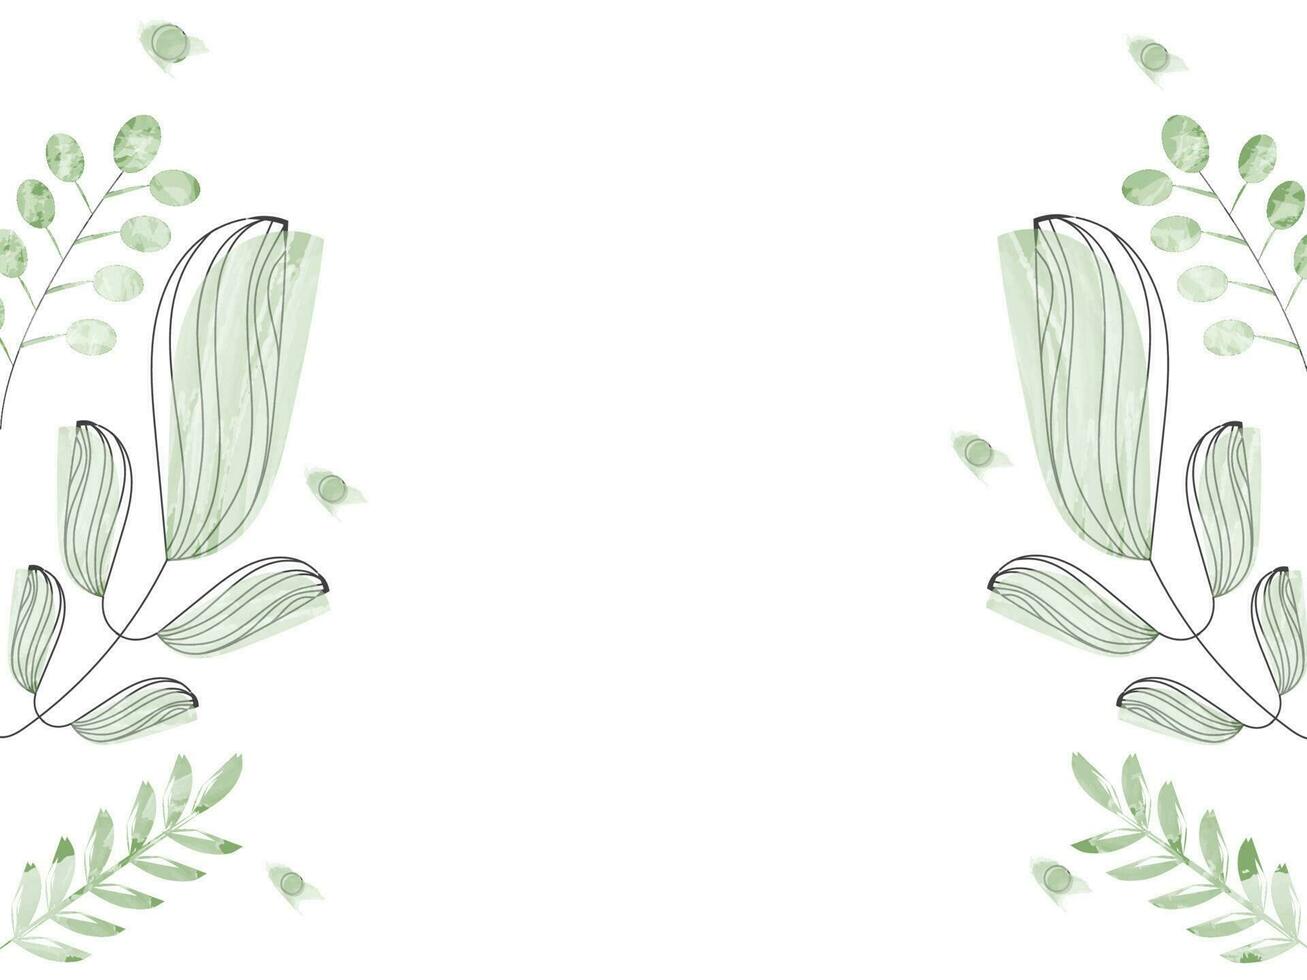 Green Watercolor Effect Leaves On White Background With Copy Space. vector